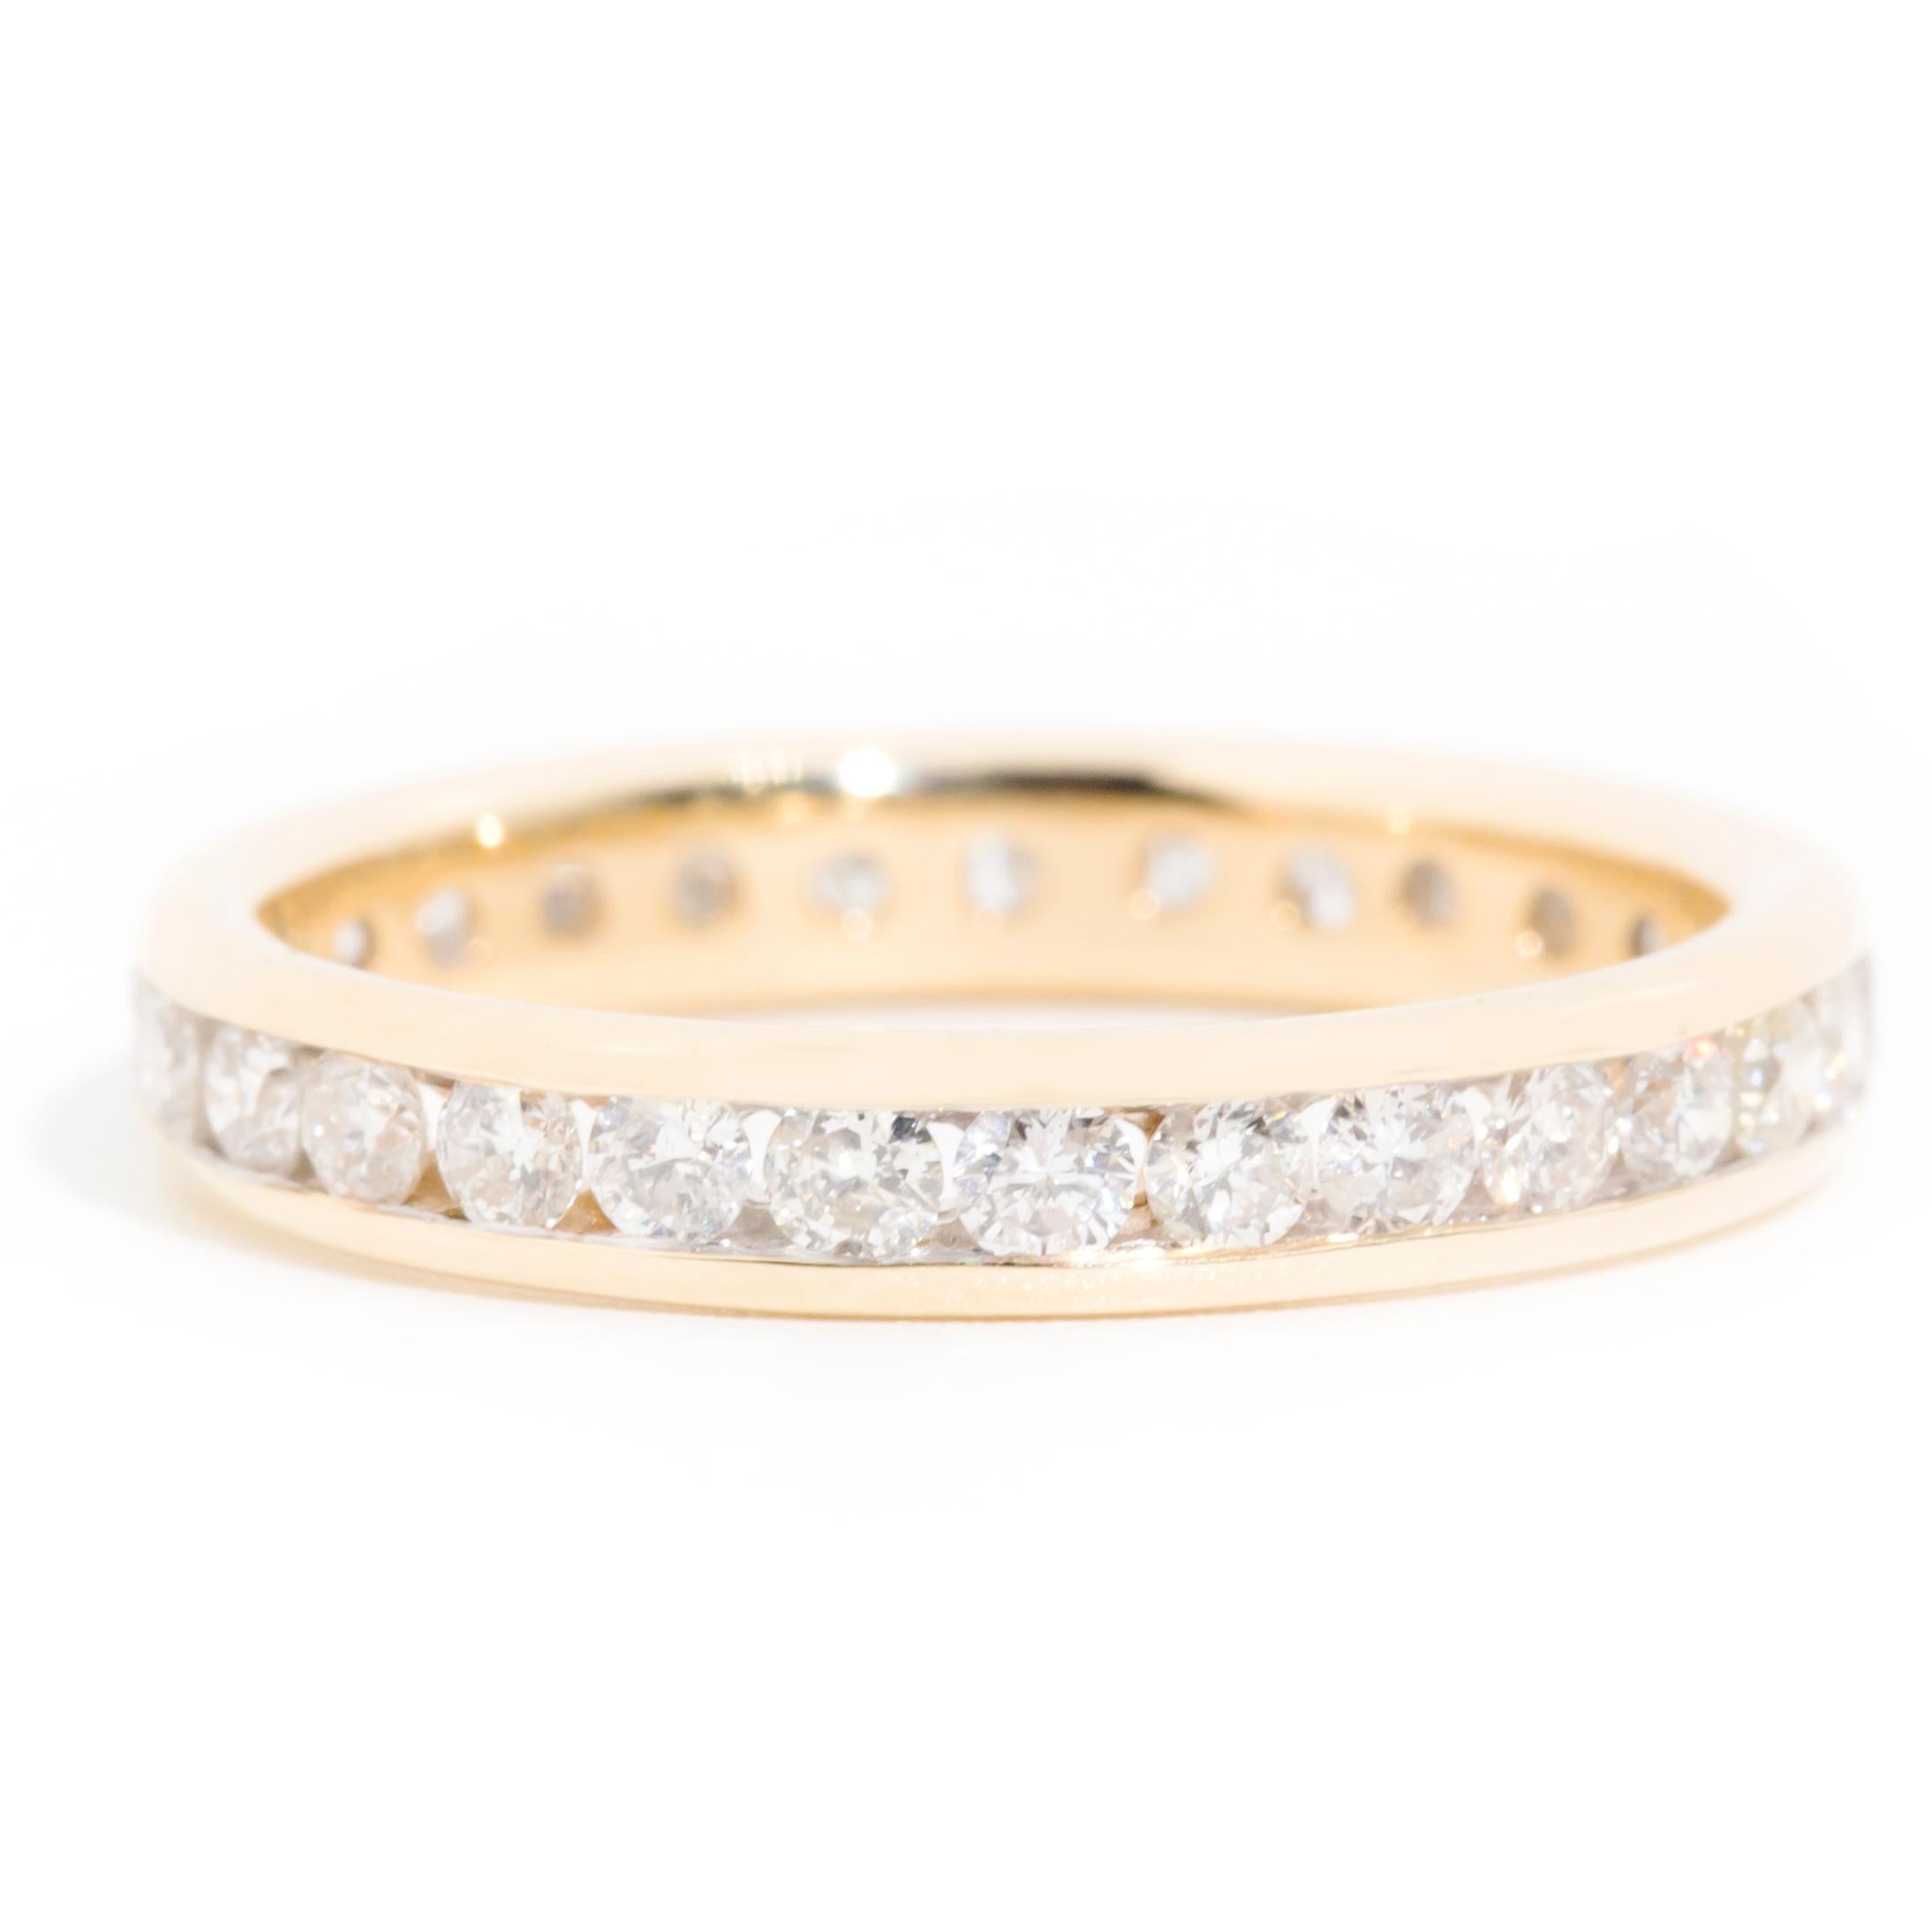 Forged in 9 carat yellow gold, this charming vintage infinity set band ring features a continuous row of sparkling round brilliant diamonds. Simple yet alluring, this lovely piece has been named The Winnie Ring. She is perfectly suited to wear on